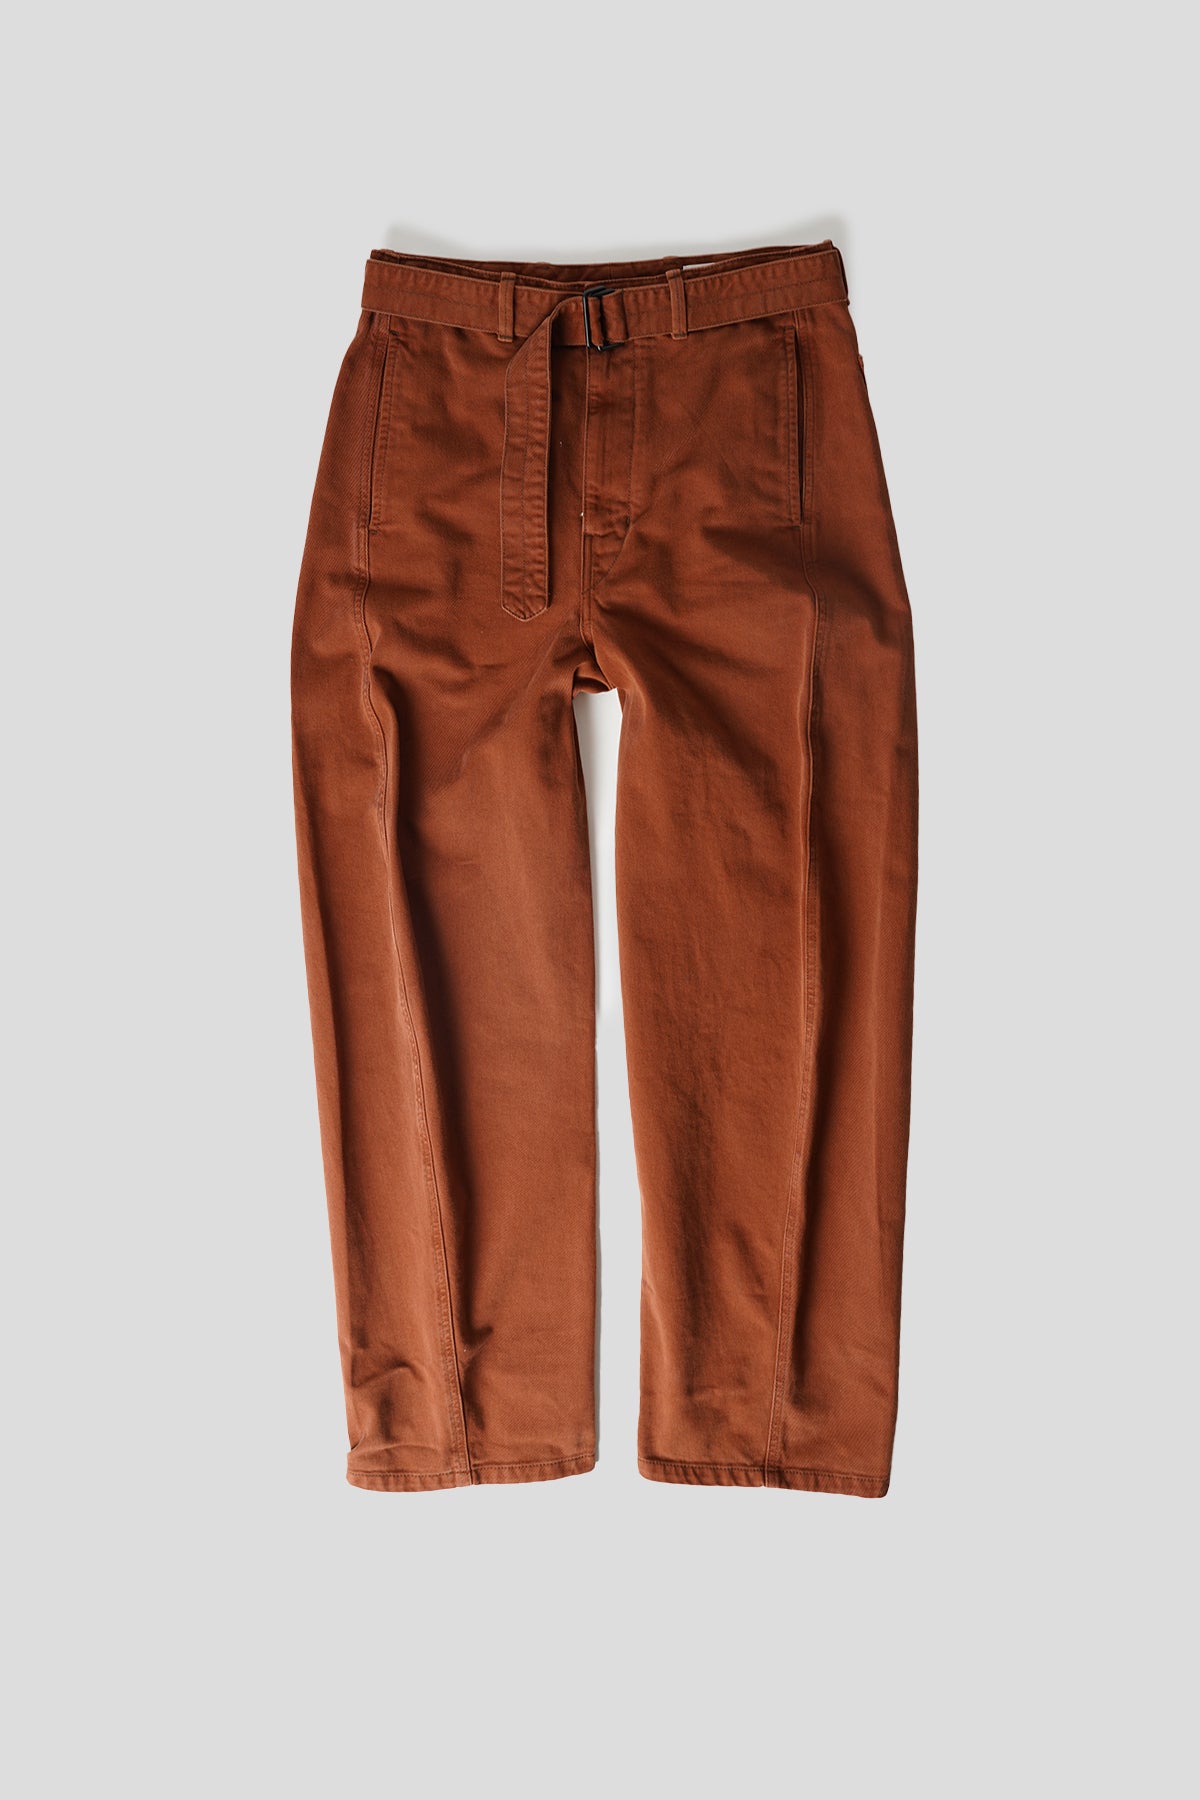 LEMAIRE - TWISTED BELTED PANT BRICK - LE LABO STORE